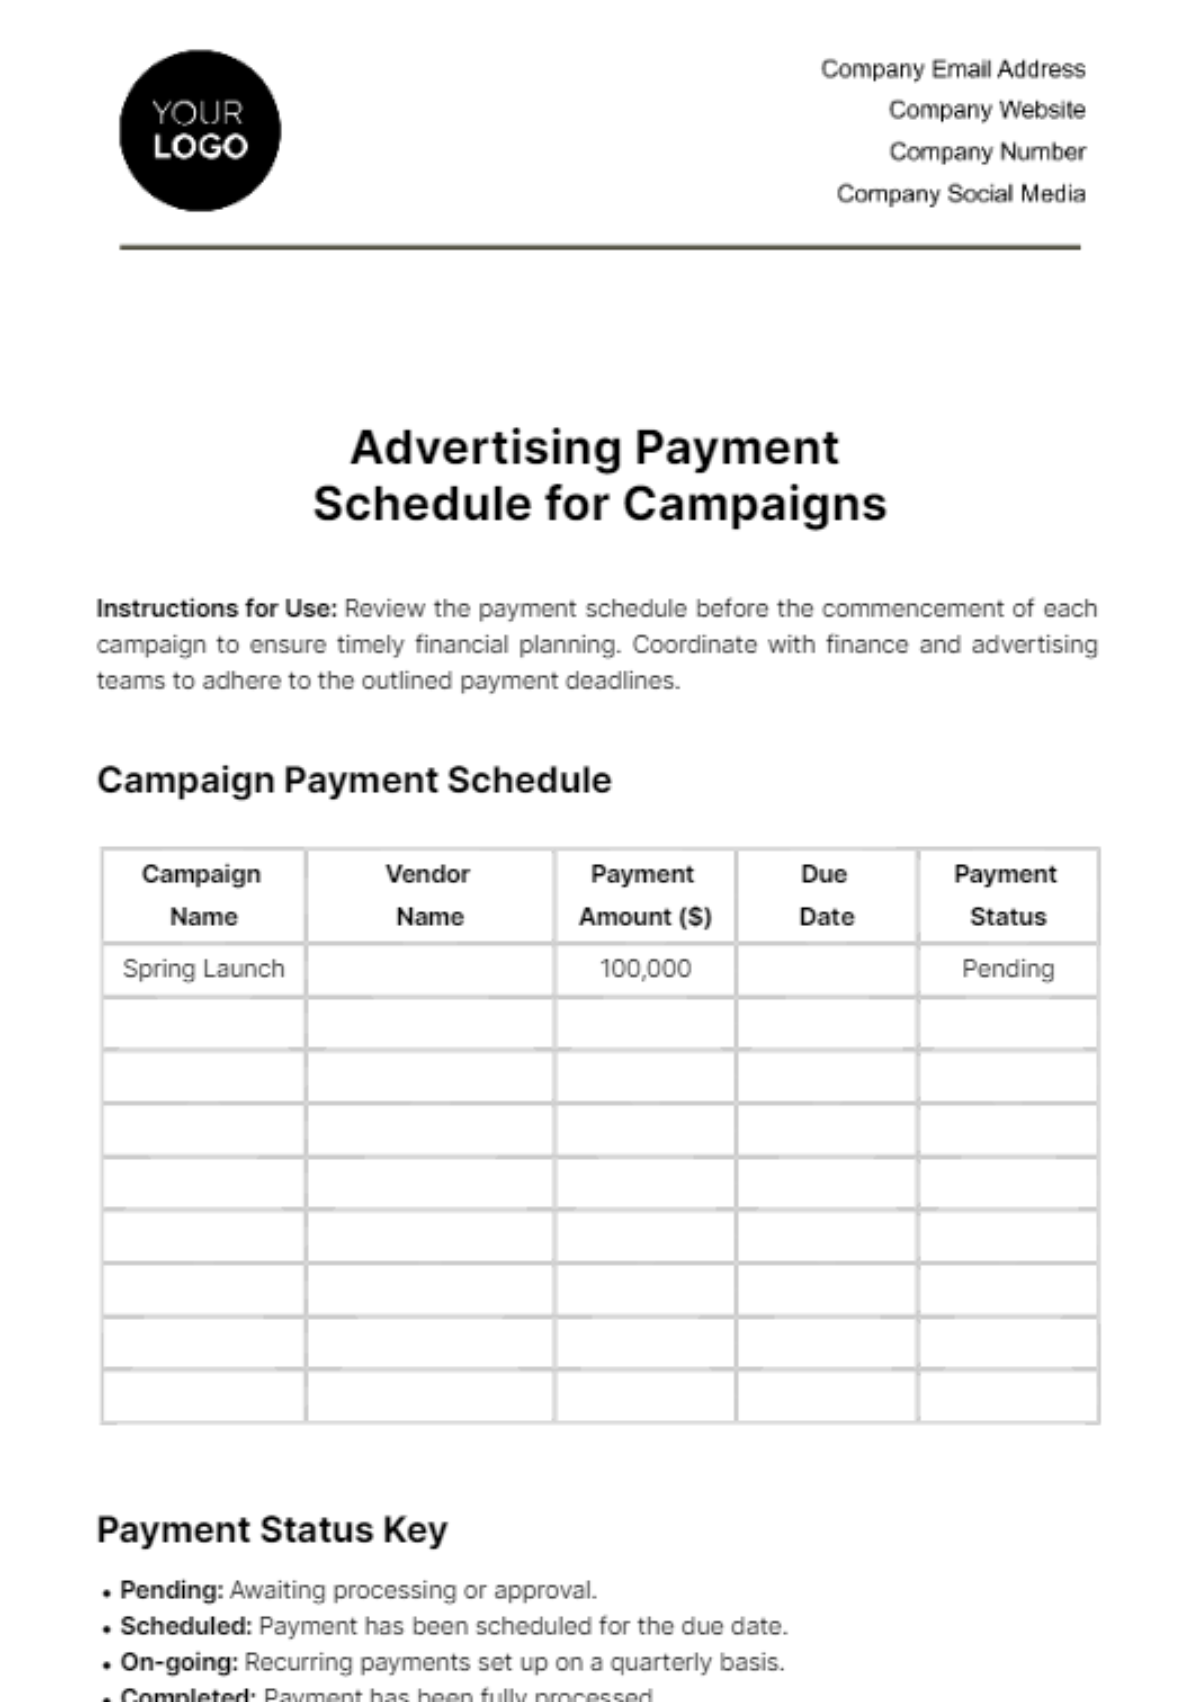 Advertising Payment Schedule for Campaigns Template